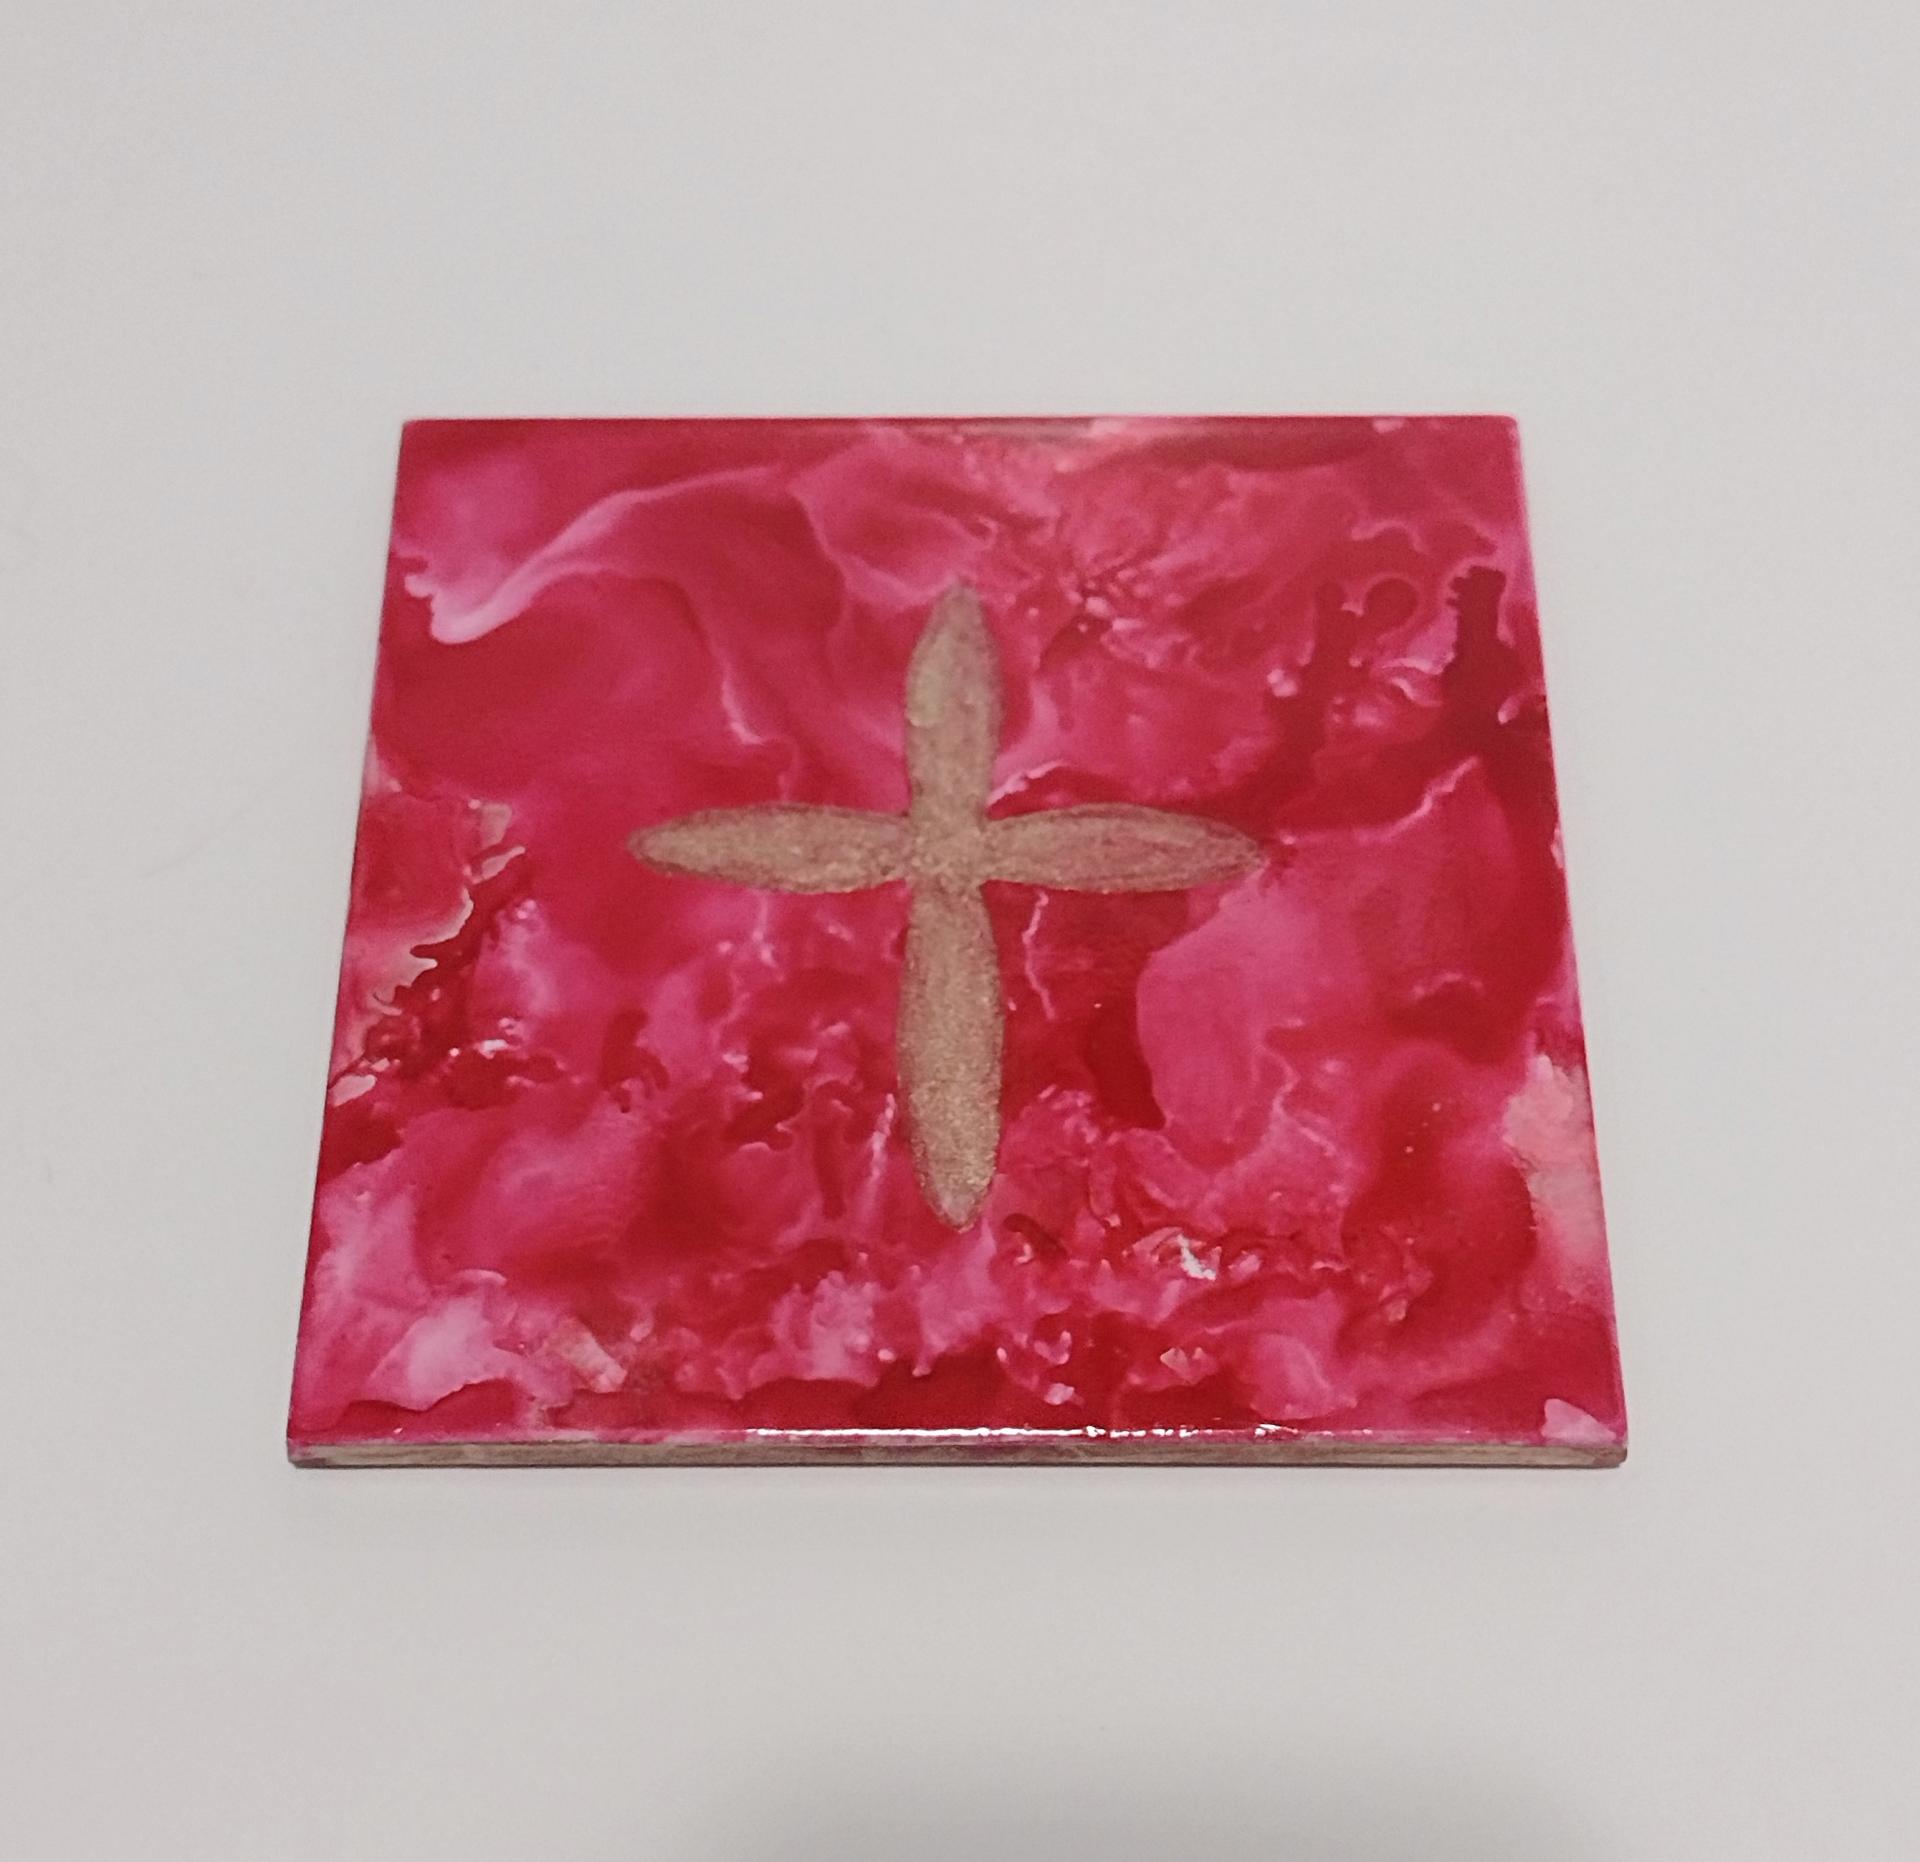 Alcohol Ink Ceramic Tile Trivet, 6" x 6", Red with Gold Metallic Cross